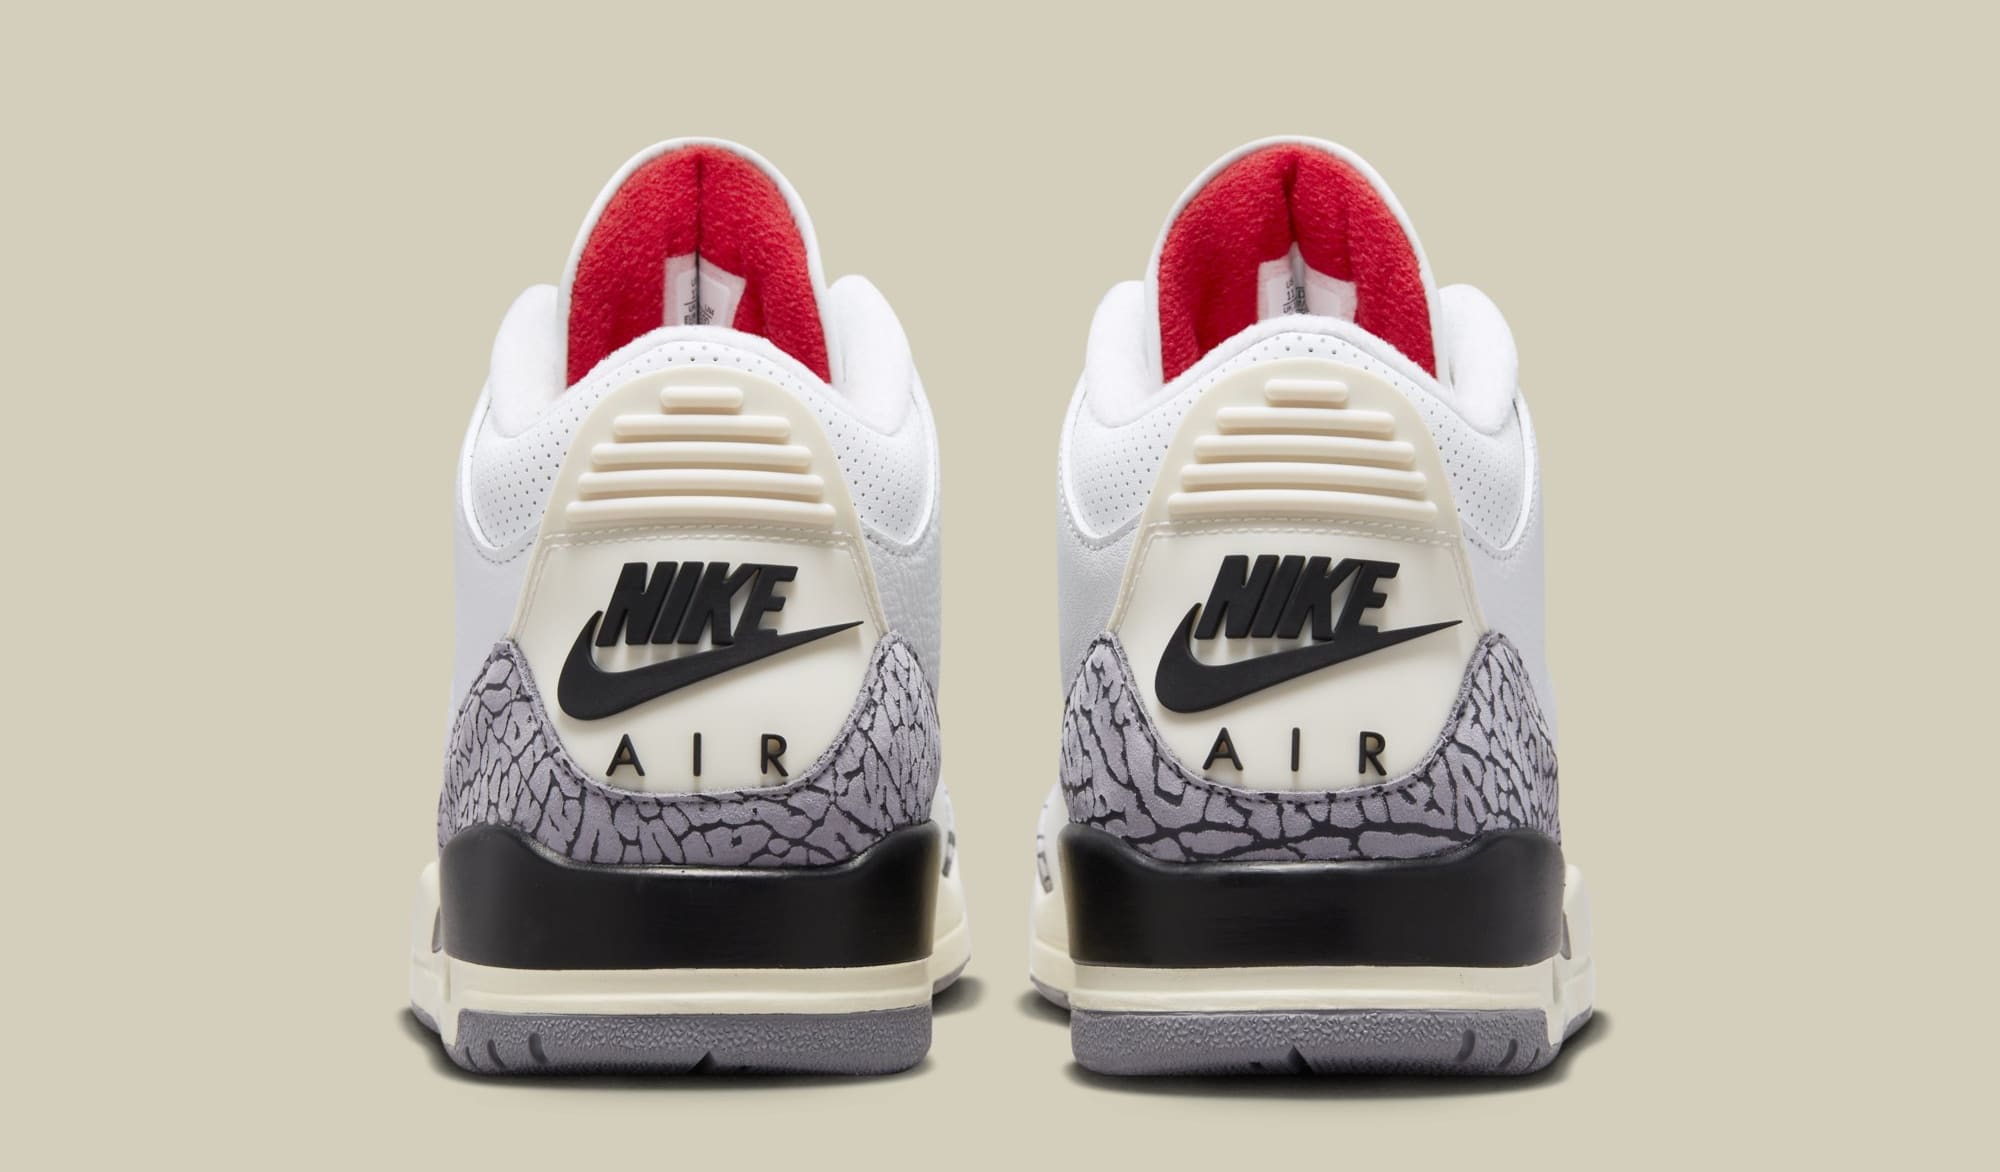 The Air Jordan 3 Blue Cement will be live early at Foot Locker at 08  Reimagined DZ5485 - 612 2022 Release Date Info - The Air Jordan 3 Blue  Cement will be